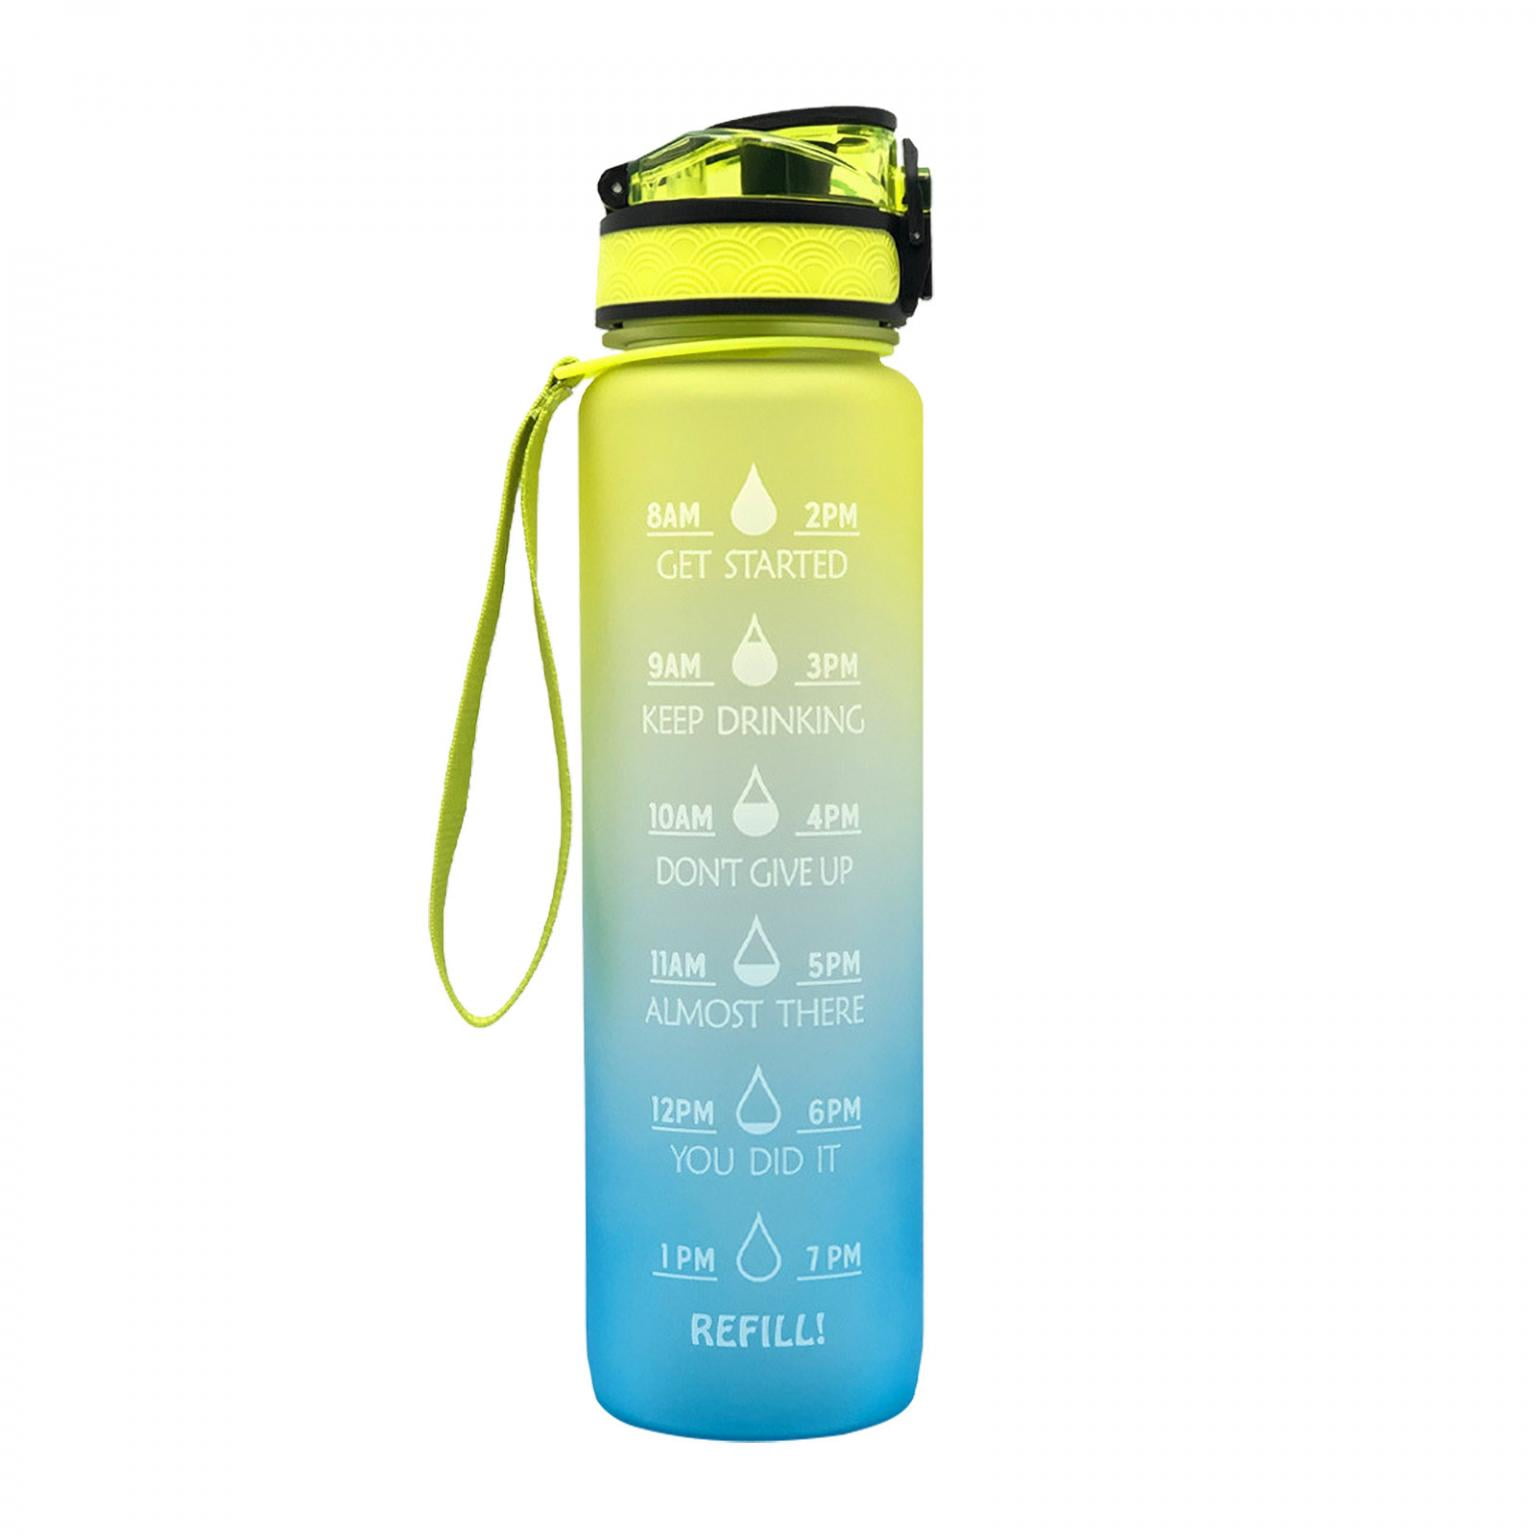 ZAKVOP 32oz Water Bottle with Times to Drink, Lightweight Motivational  Water Bottle with Time Marker…See more ZAKVOP 32oz Water Bottle with Times  to